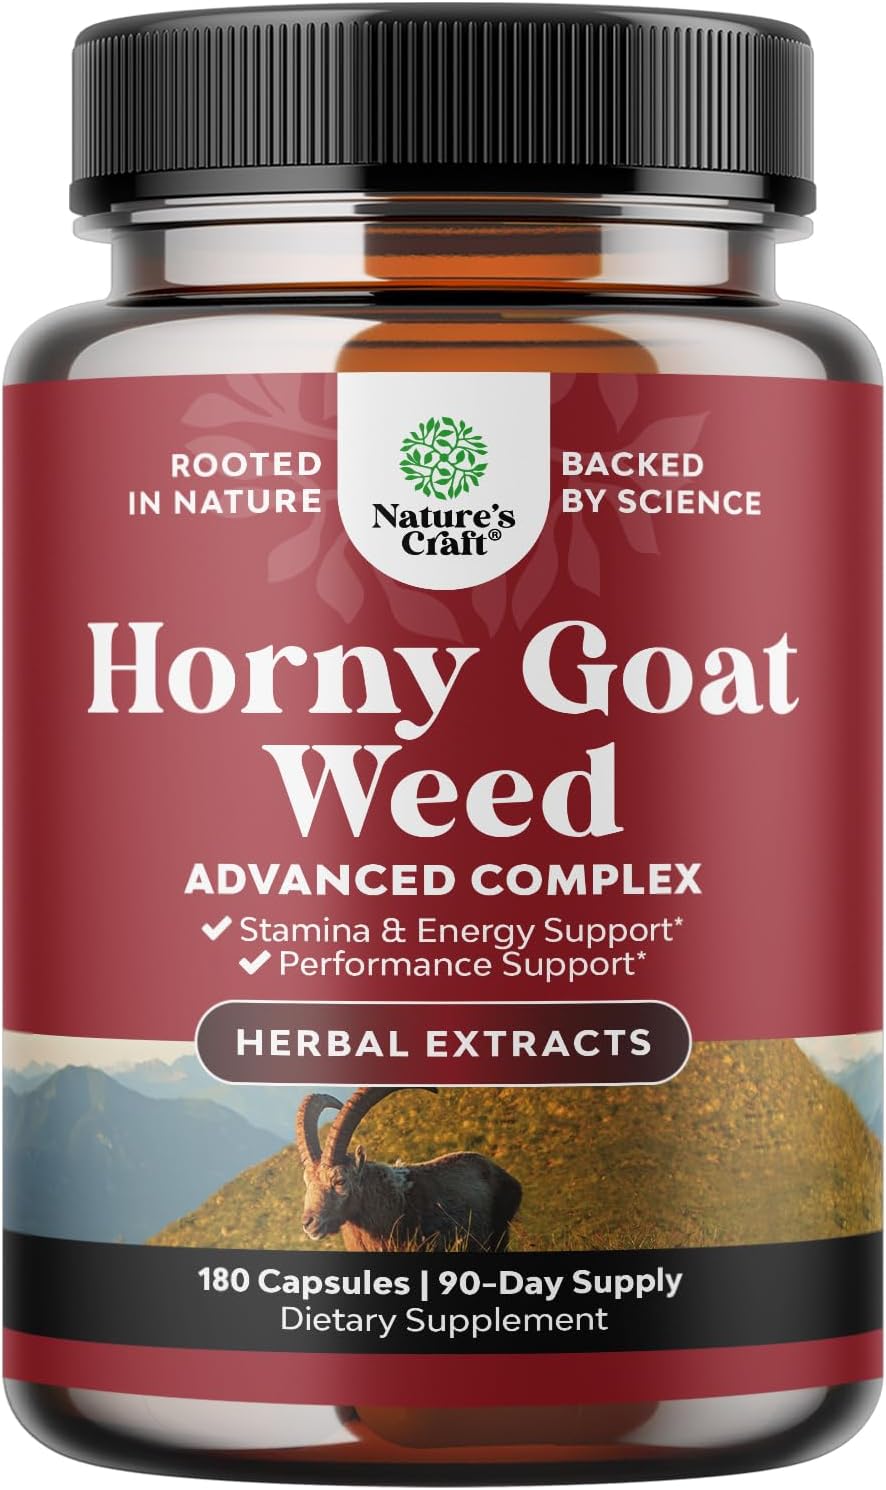 Horny Goat Weed Review